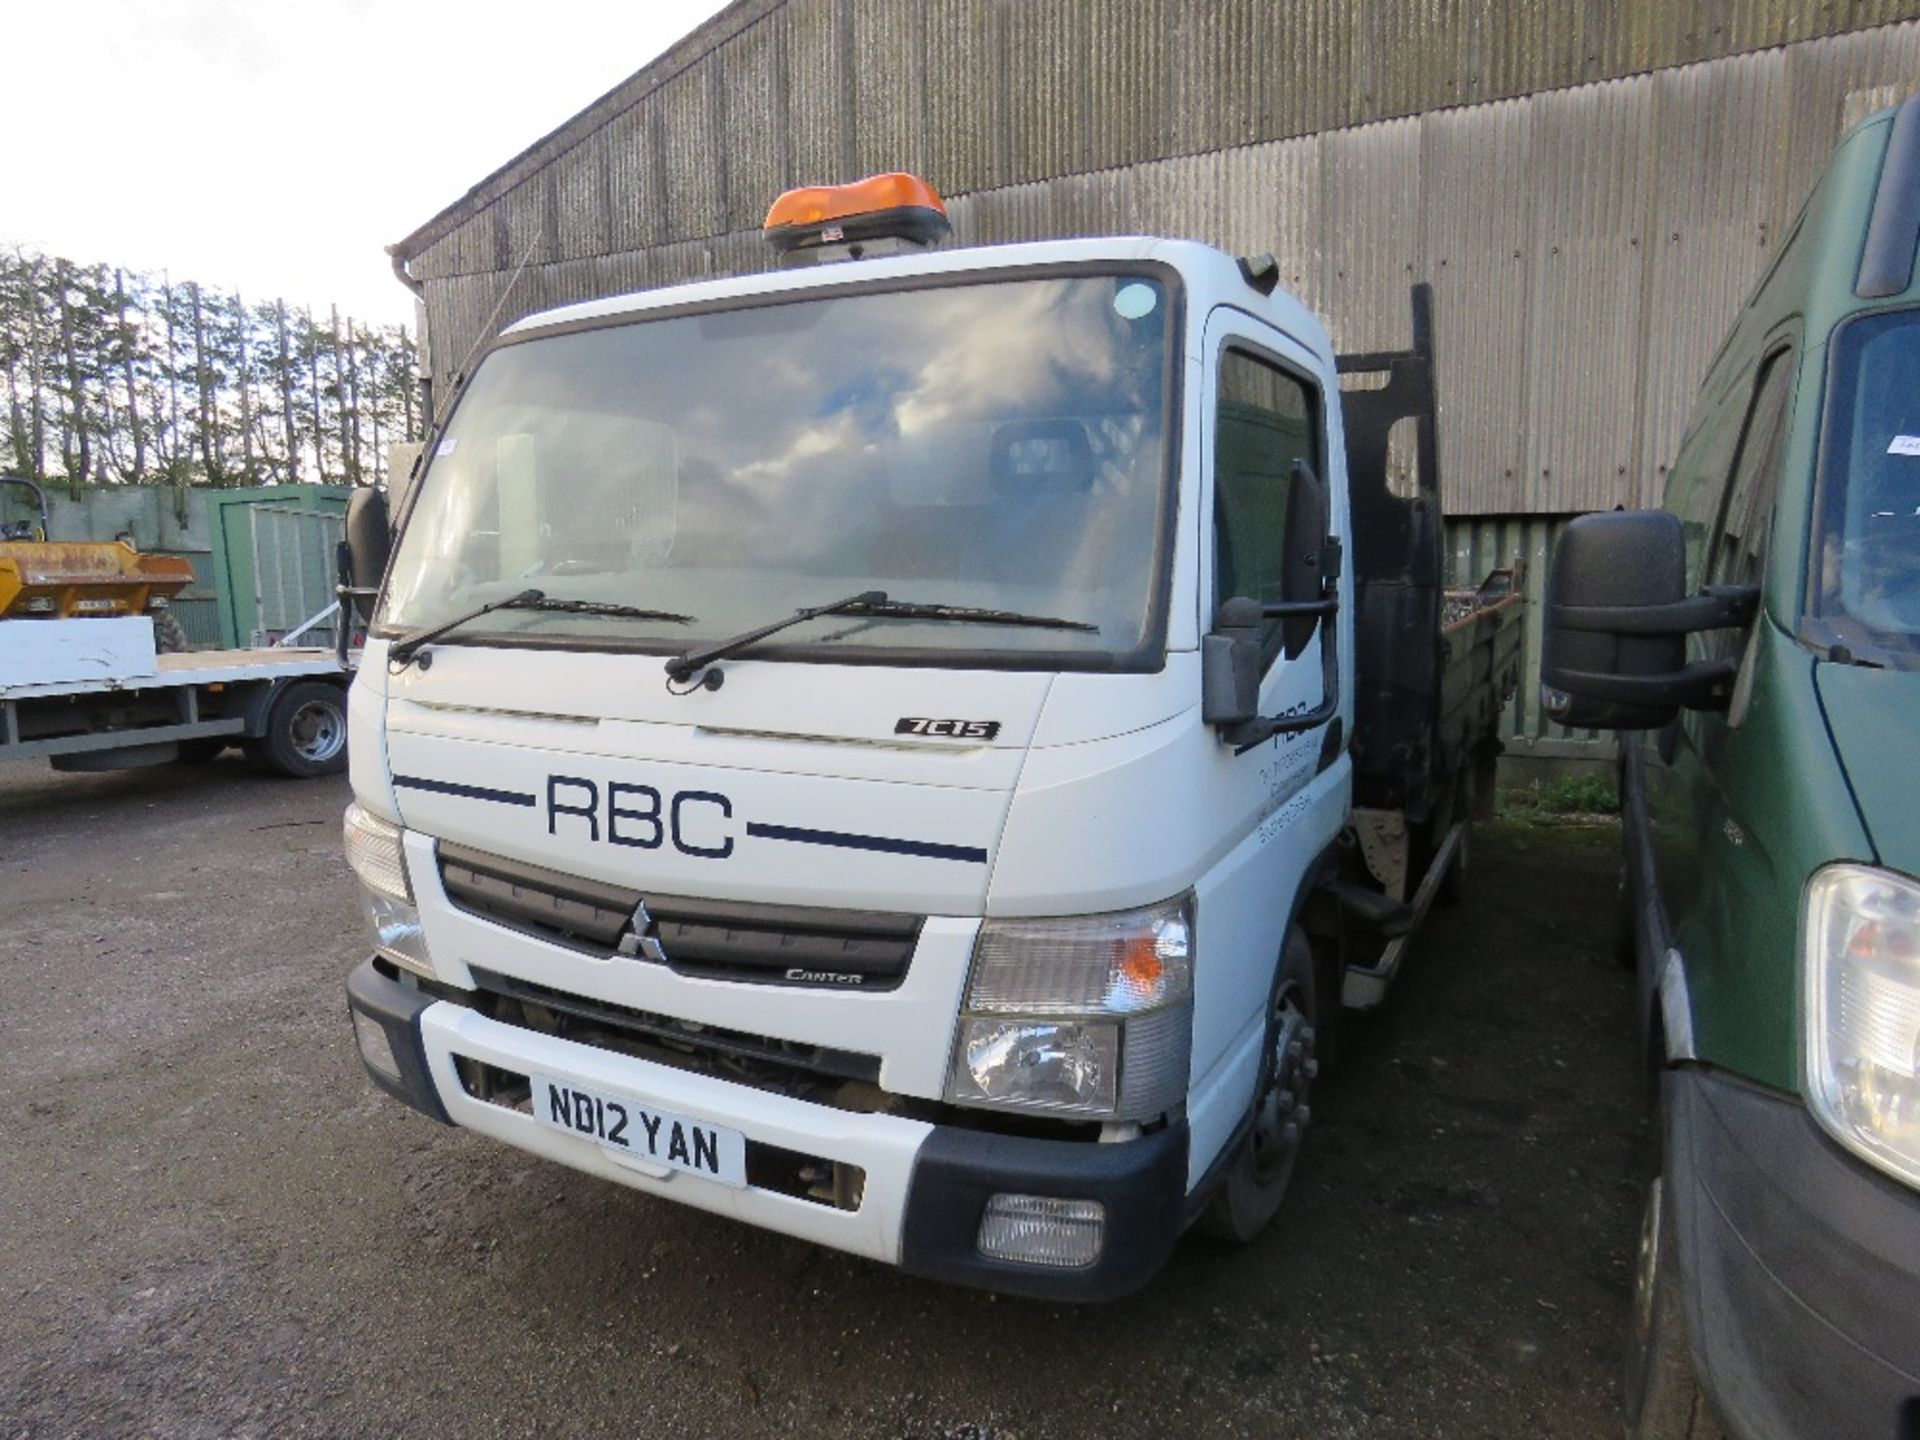 MITSUBISHI CANTER 7C15 7500KG TIPPER REG:GJ12 VYR (PRIVATE PLATE JUST REMOVED).56,611 REC MILES. - Image 3 of 9